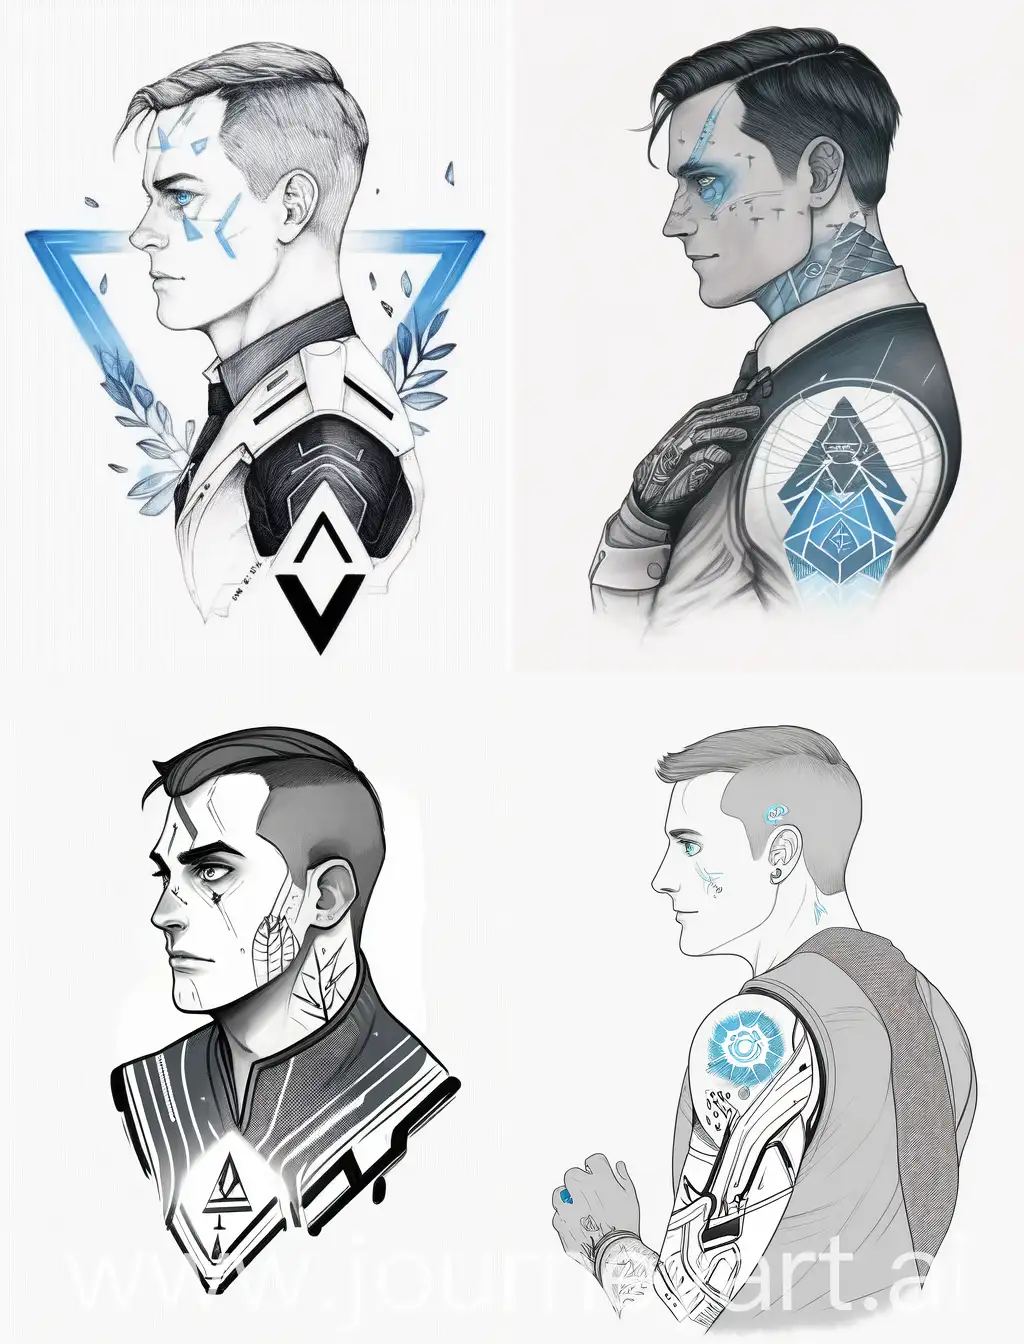 connor from detroit become human, tattoo design sketch, white background
